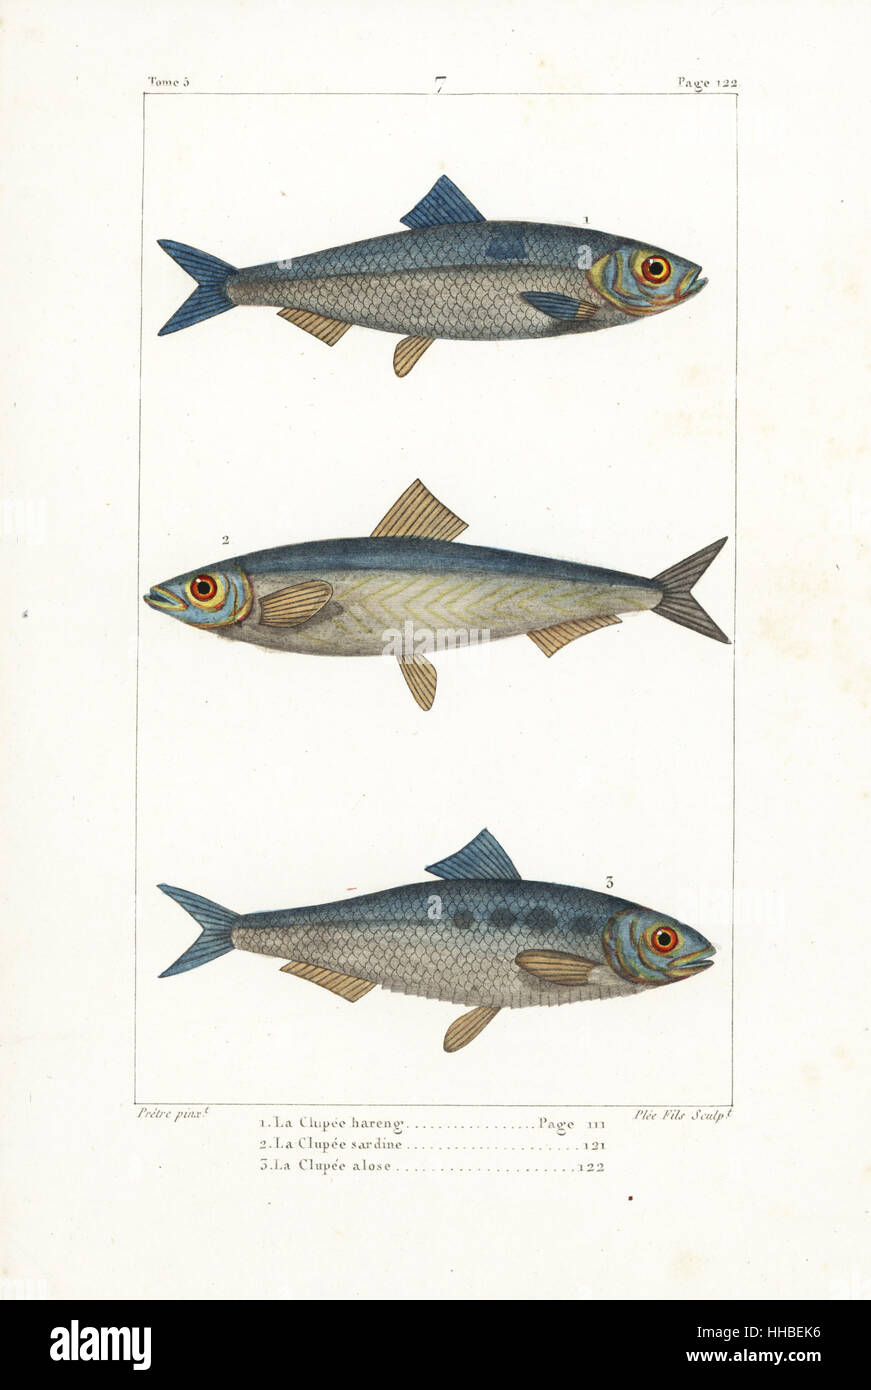 Herring, Clupea harengus, sprat, Sprattus sprattus, and shad, Alosa alosa. Handcoloured copperplate engraving by Plee Jr. after an illustration by Jean-Gabriel Pretre from Bernard Germain de Lacepede's Natural History of Oviparous Quadrupeds, Snakes, Fish and Cetaceans, Eymery, Paris, 1825. Stock Photo